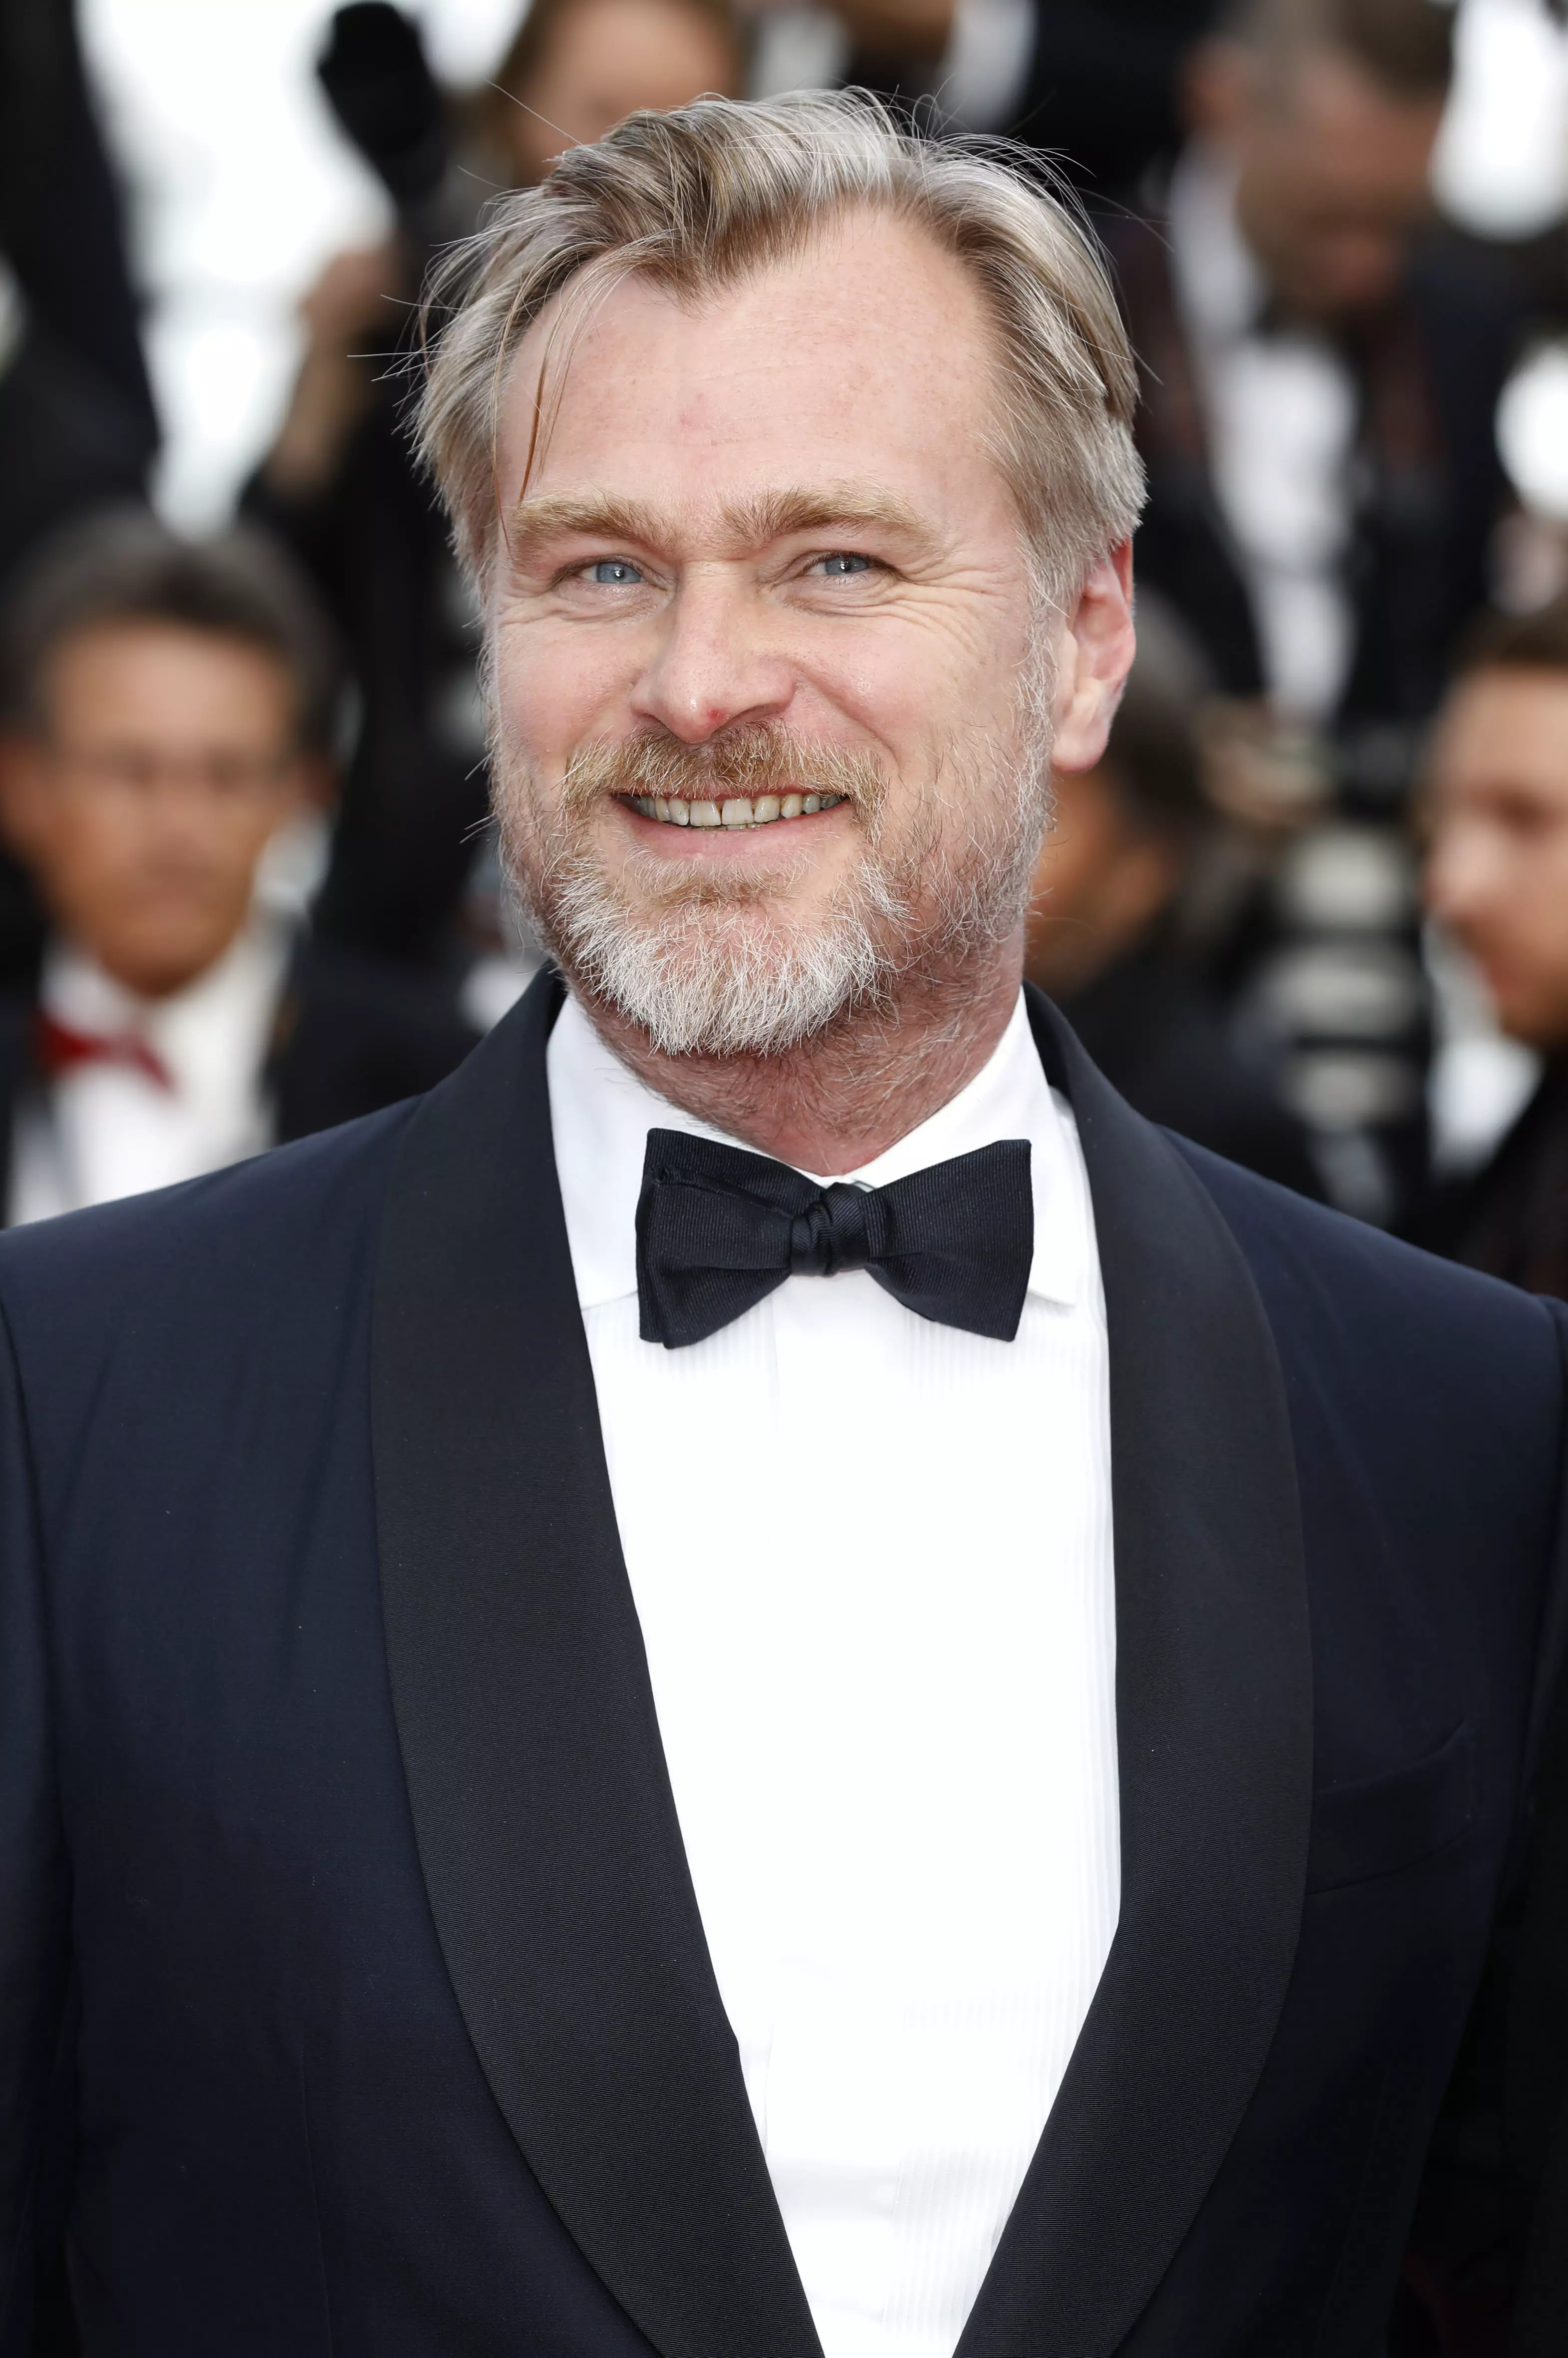 Christopher Nolan is presiding over a stellar cast for his next production.